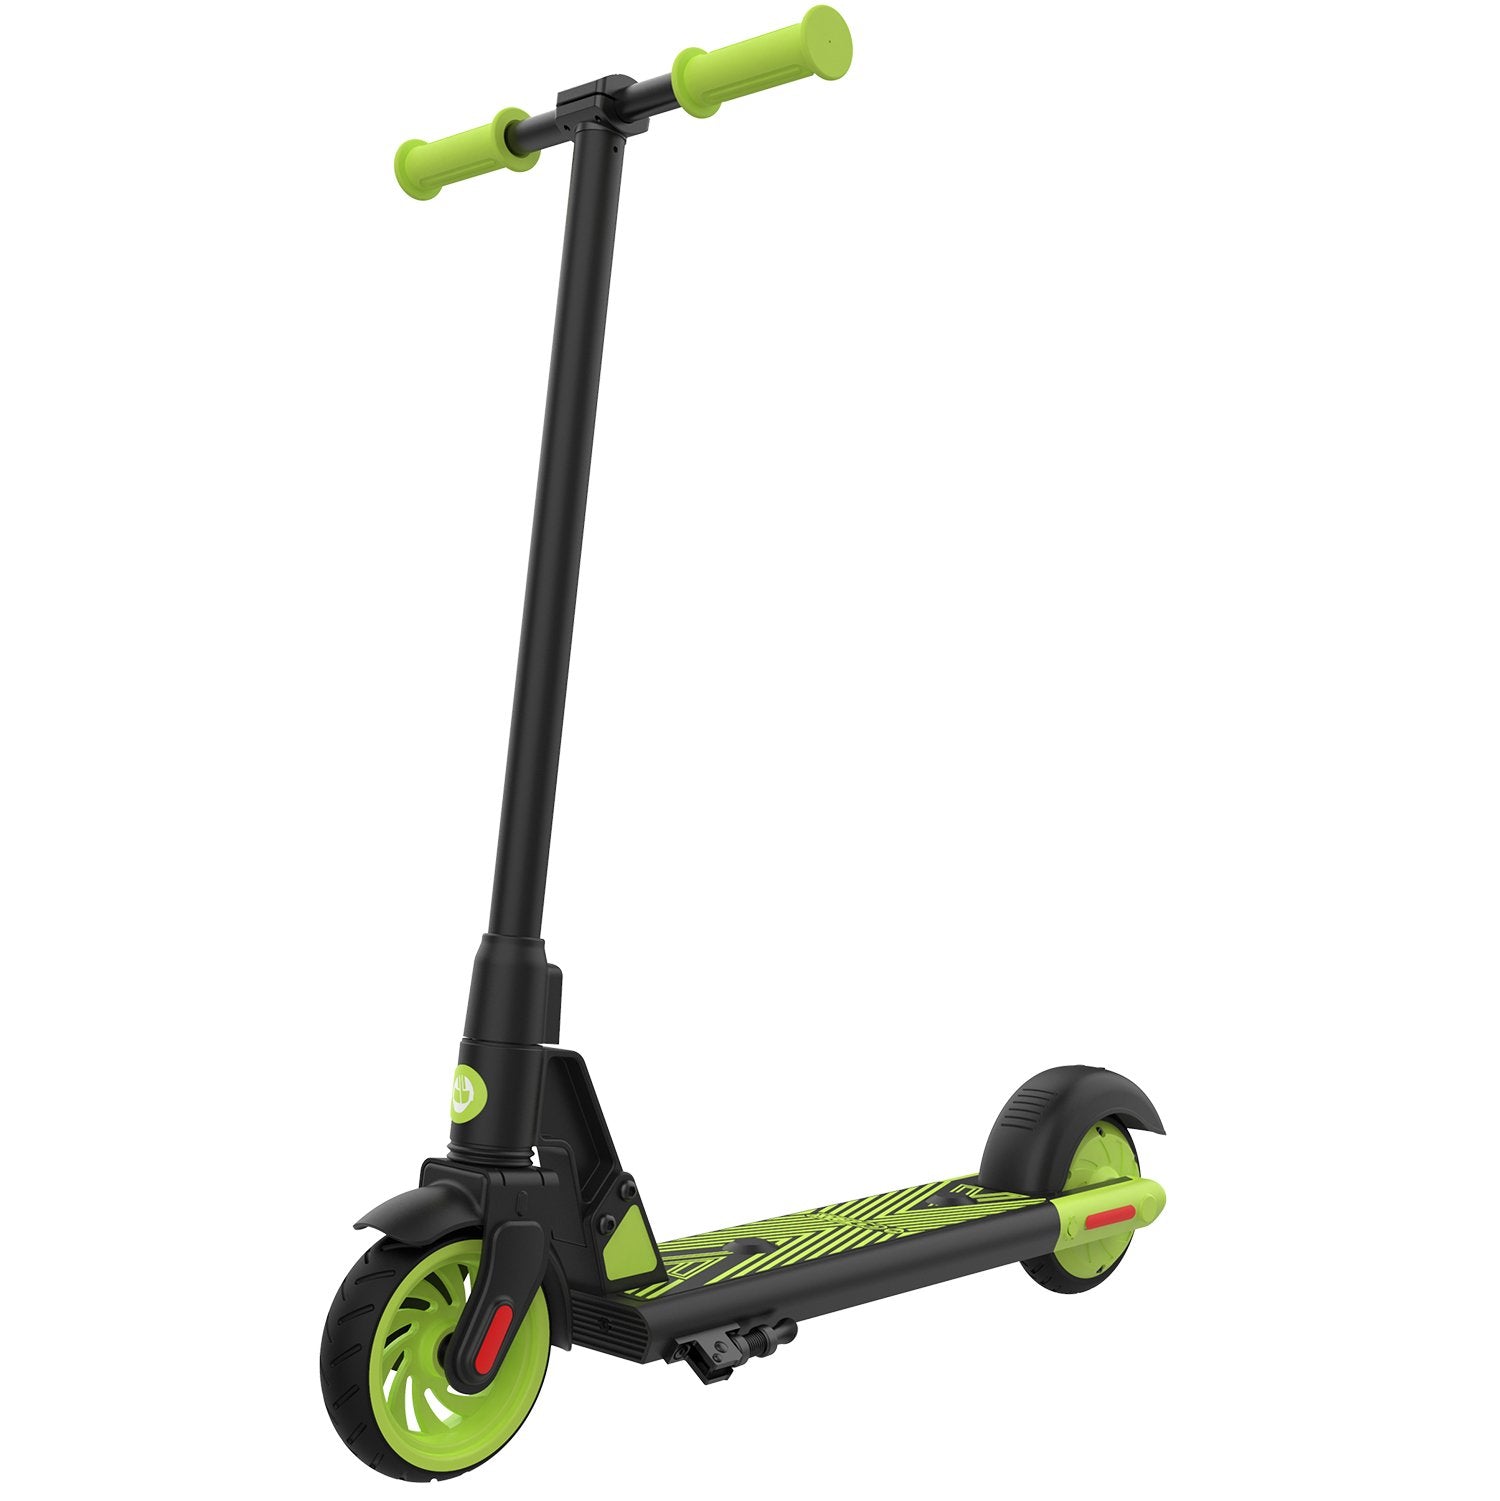 Green gks electric scooter for kids main image